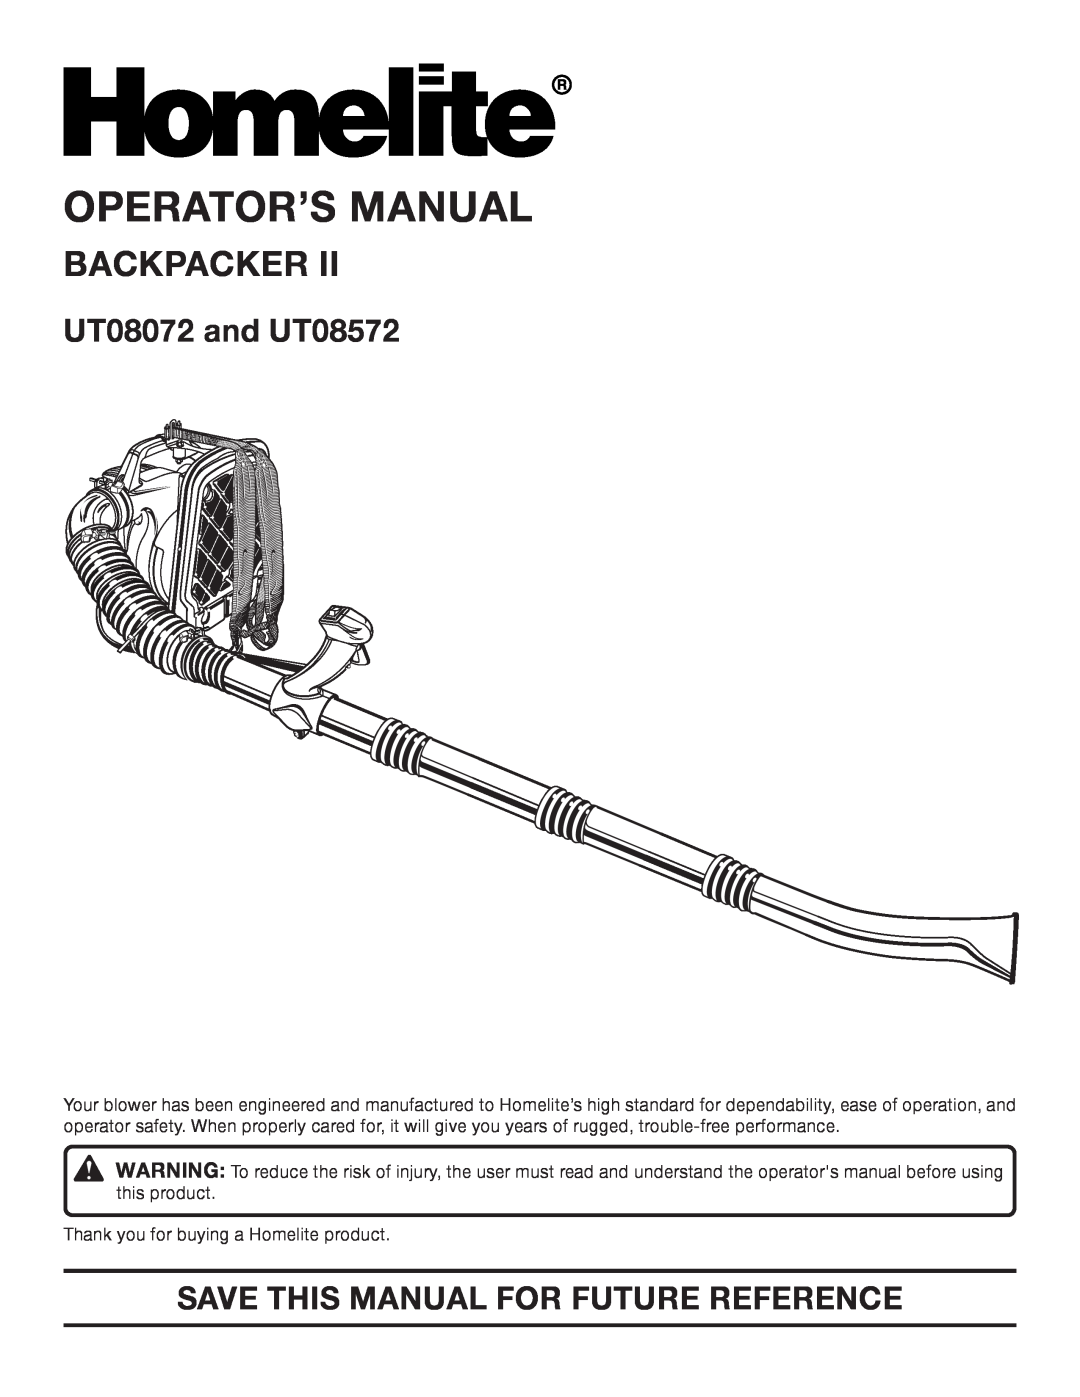 Homelite manual Operator’S Manual, Backpacker, UT08072 and UT08572, Save This Manual For Future Reference 